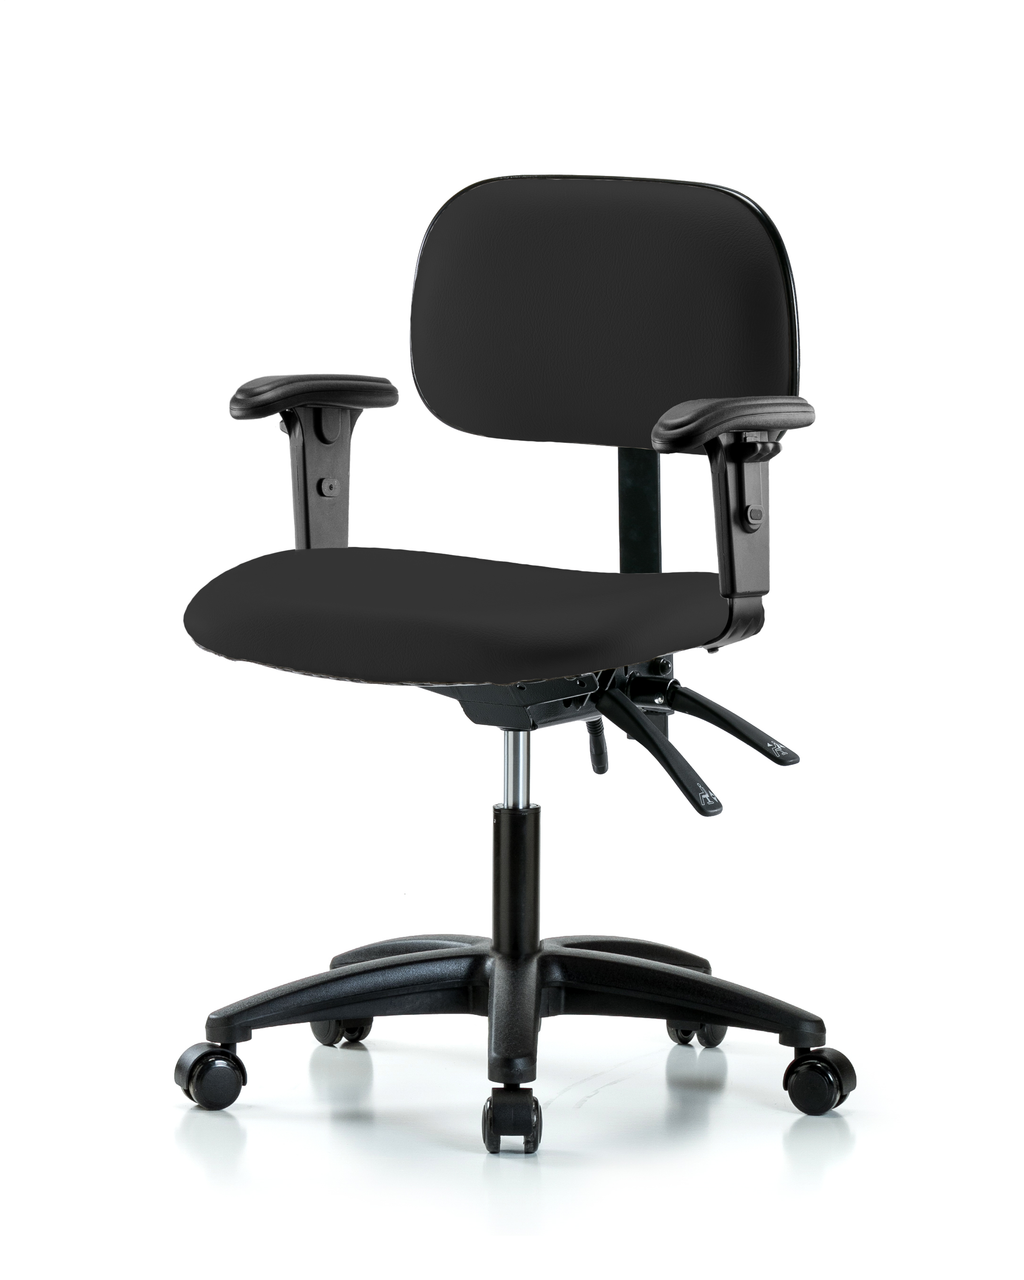 https://cdn11.bigcommerce.com/s-w9bdixgj/images/stencil/1280x1280/products/3009/6761/Vinyl_Desk_Lab_Chair_with_Black_Base_Adjustable_Arms_And_Black_Casters-_VDHCH-RG-T0-A1-RC-8540_-_Laboratory_Chairs_-_Stellar_Scientific__81933.1596033940.png?c=2